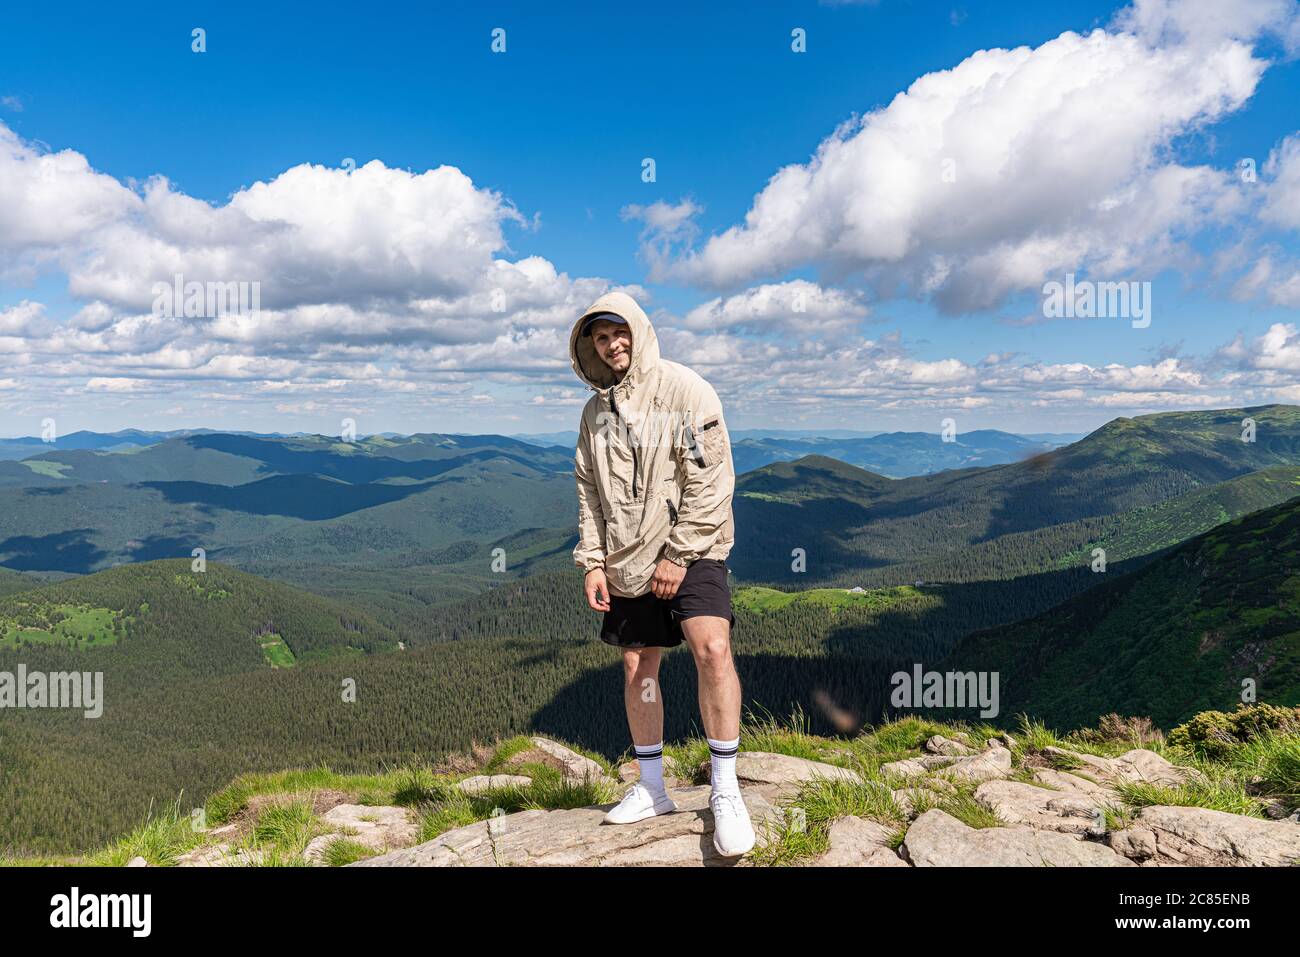 Tourist Man Standing On Mountain Top, Happy Smiling Over Beautiful Landscape Stock Photo